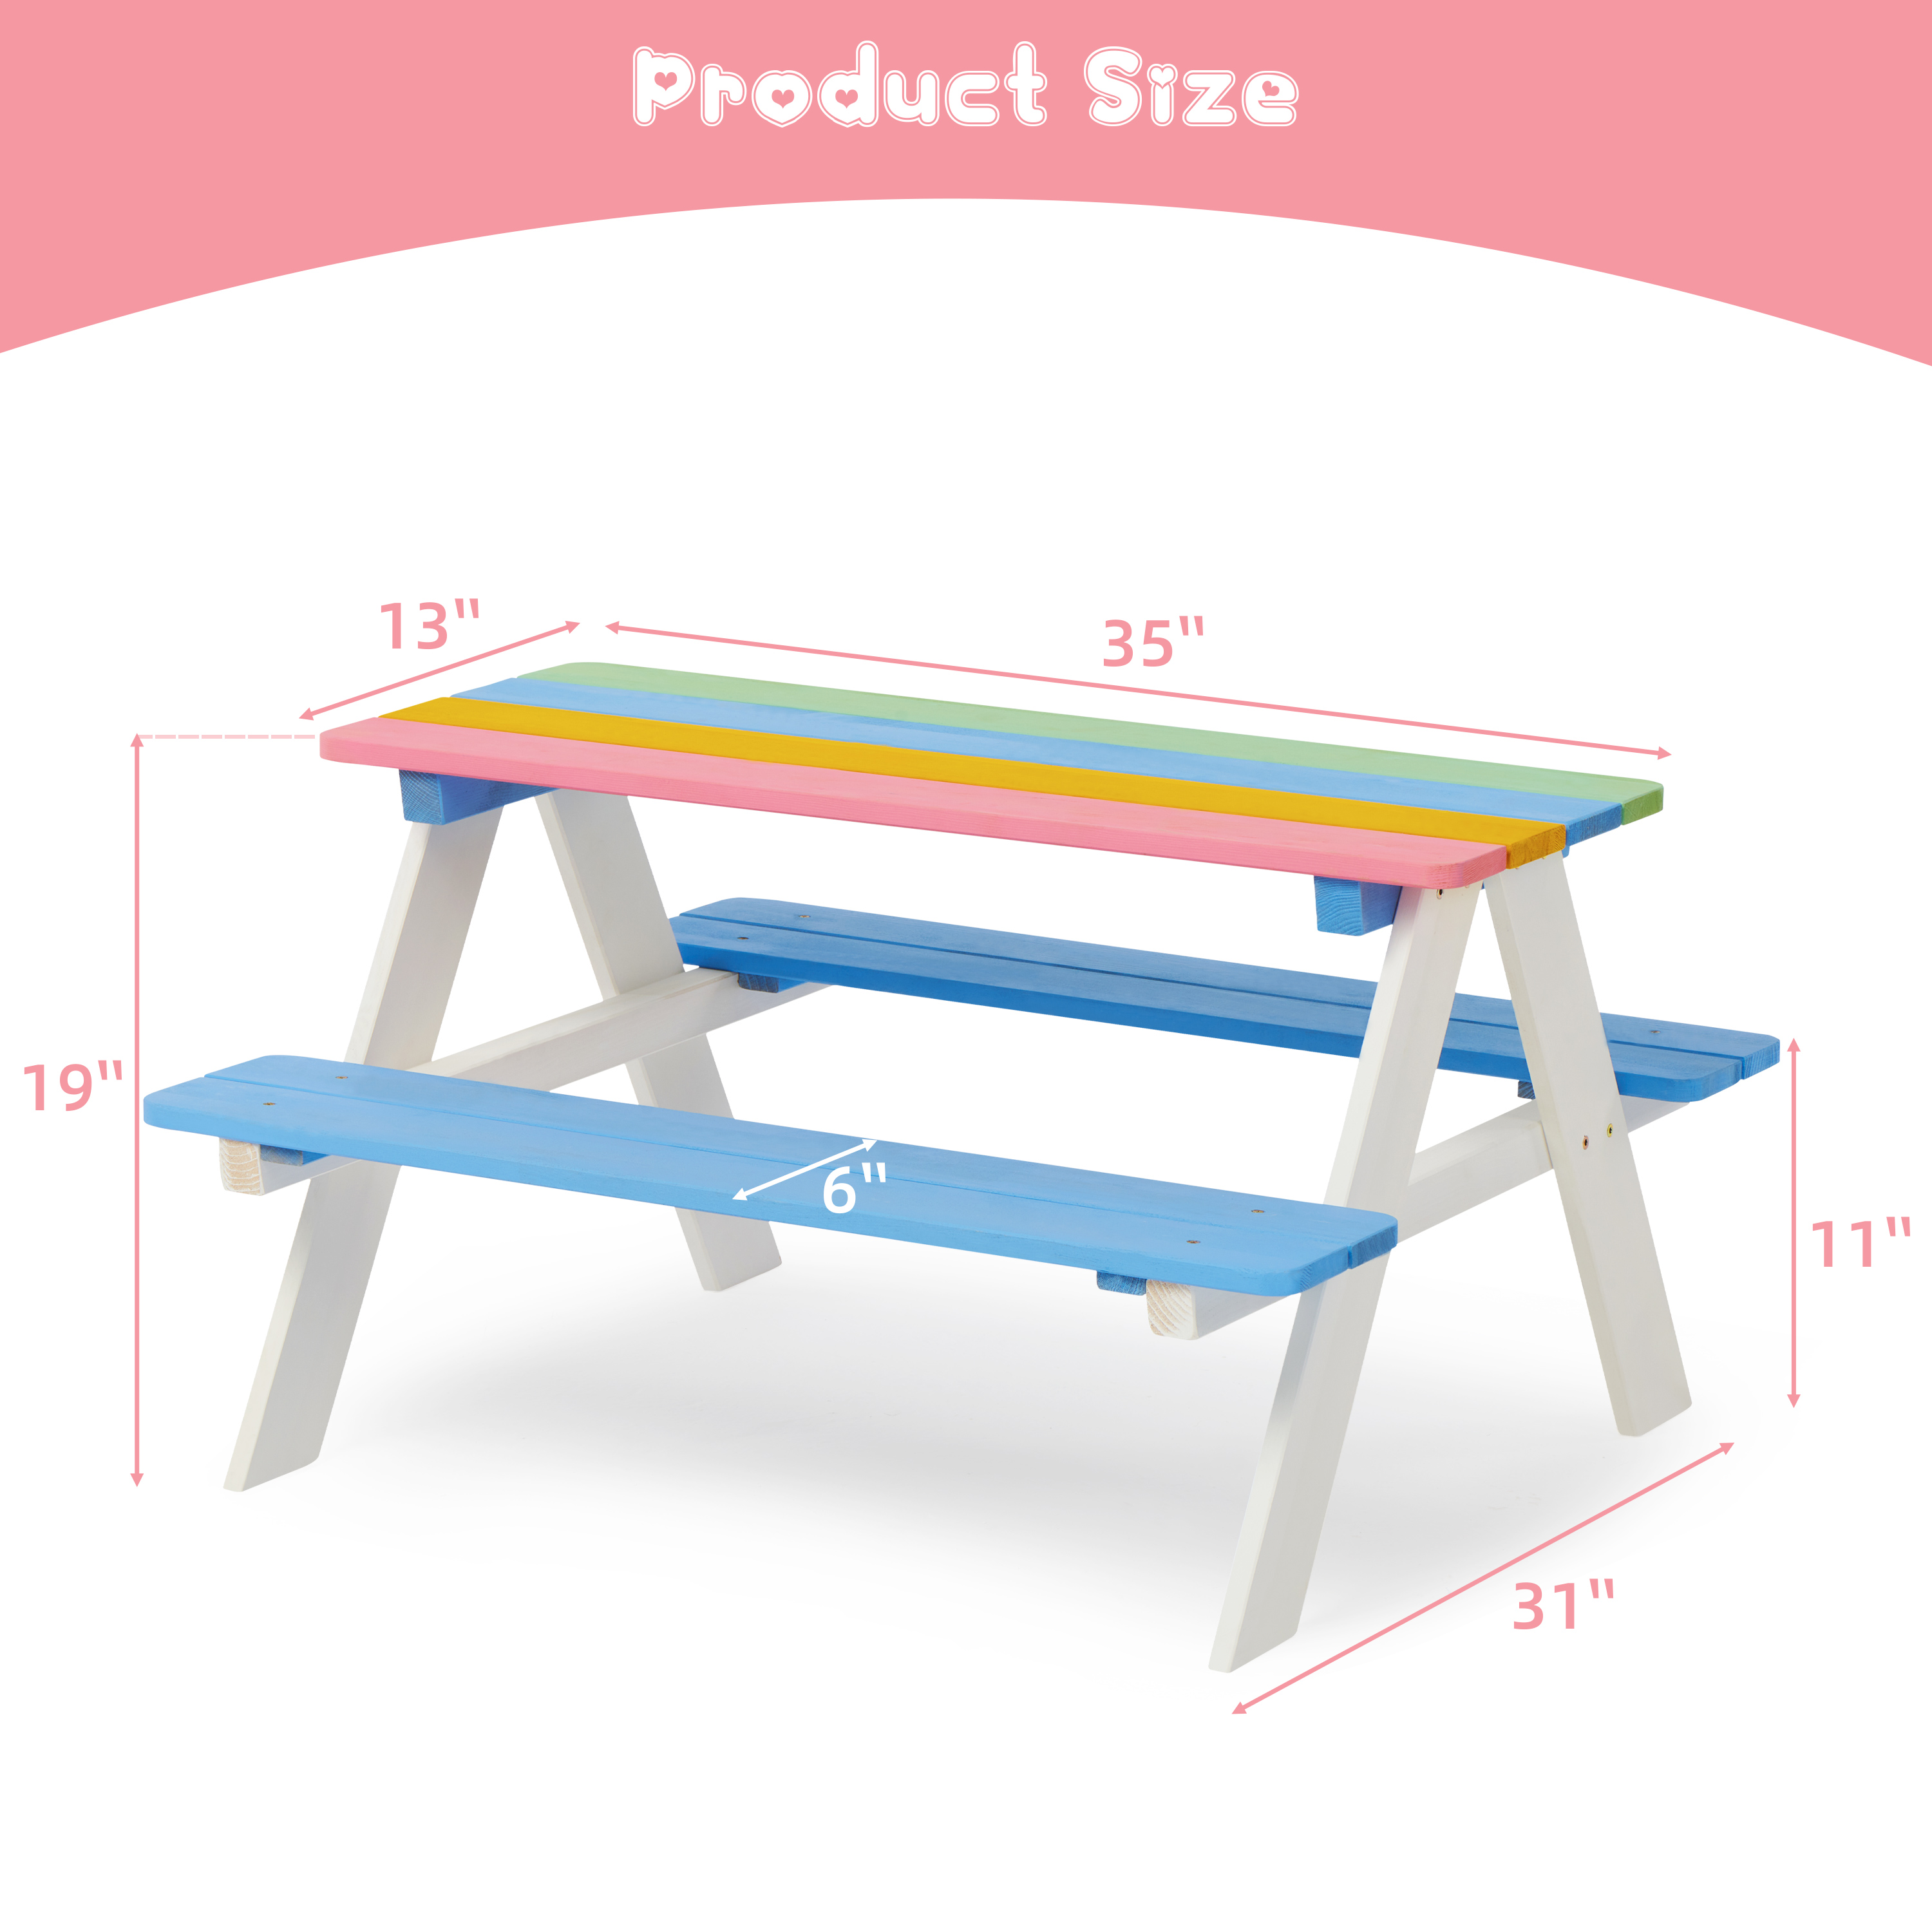 D-road Outdoor Kids Picnic Table & Bench Set, Cedar Wood, Rainbow Color - image 3 of 6